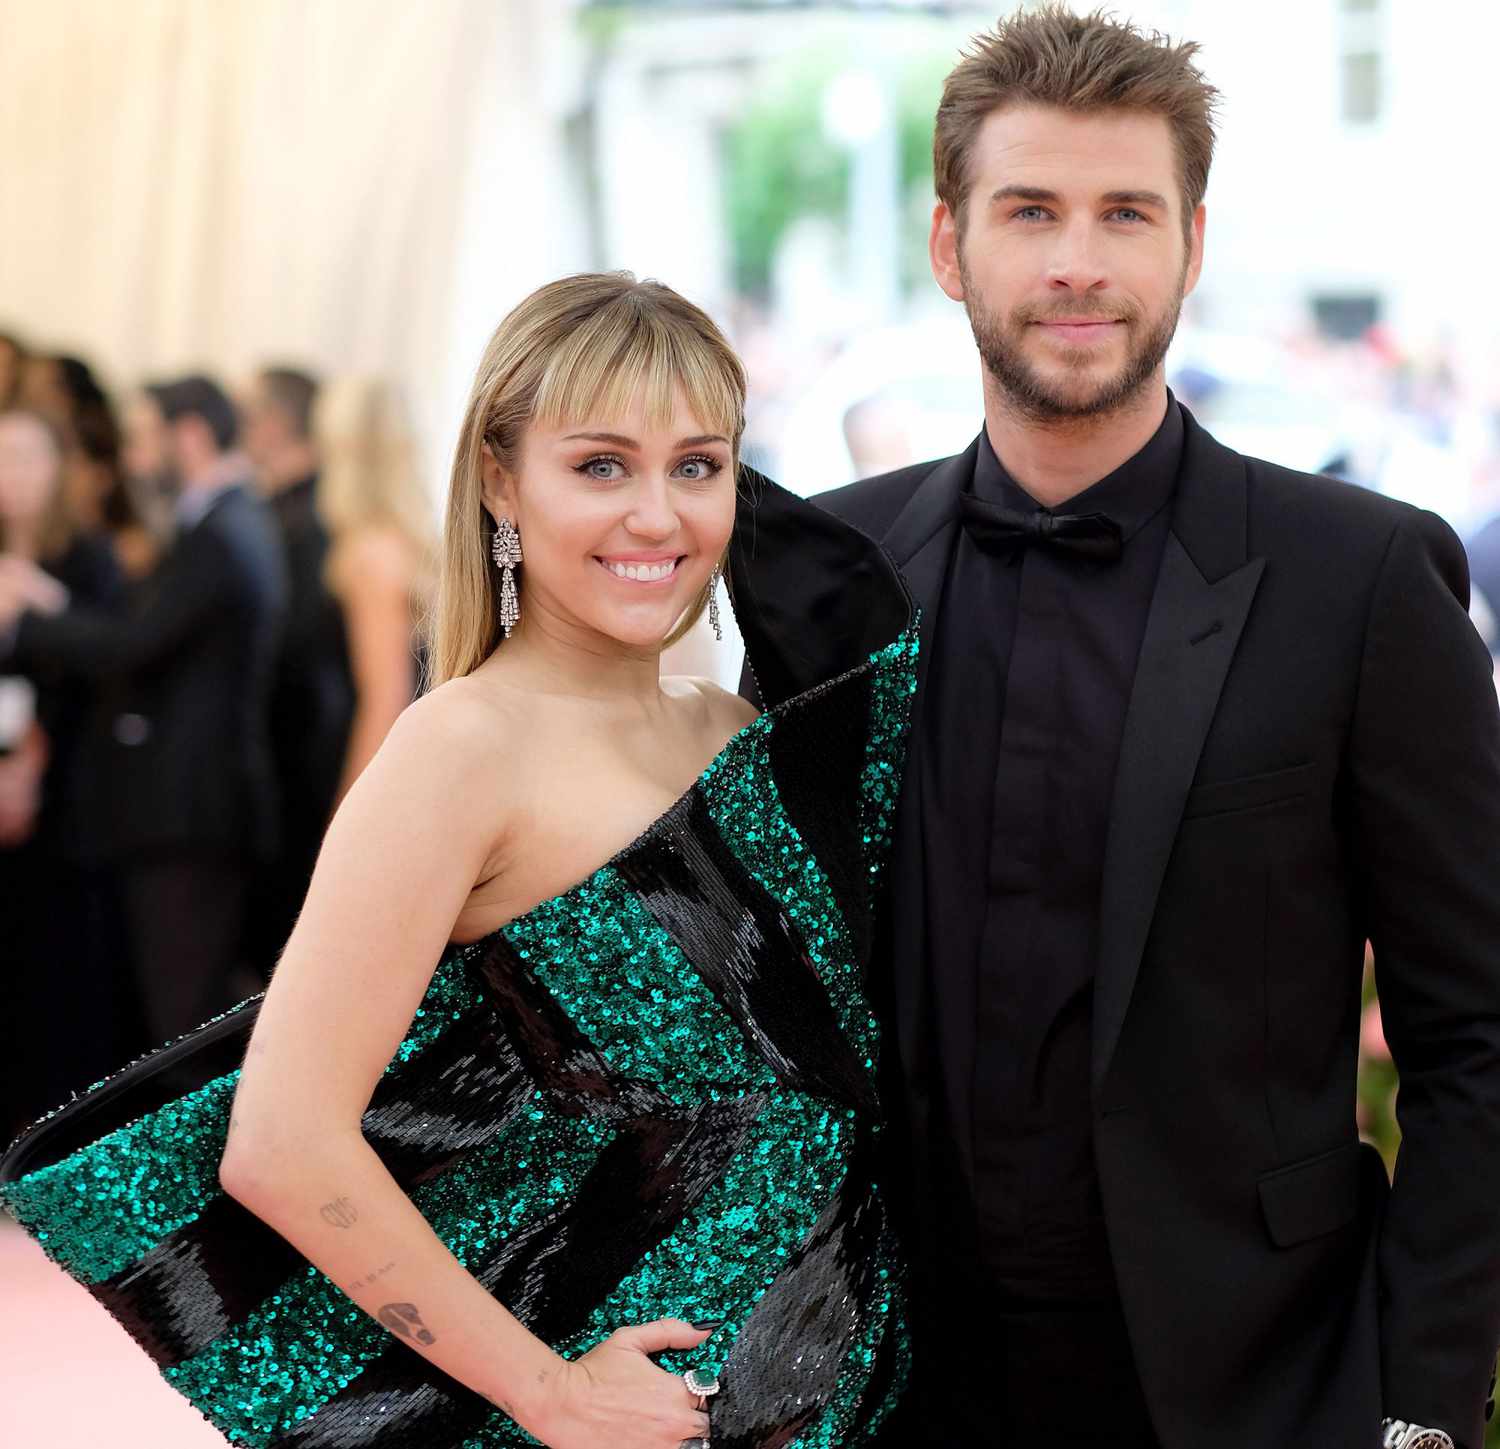 Liam Hemsworth and Miley Cyrus together.